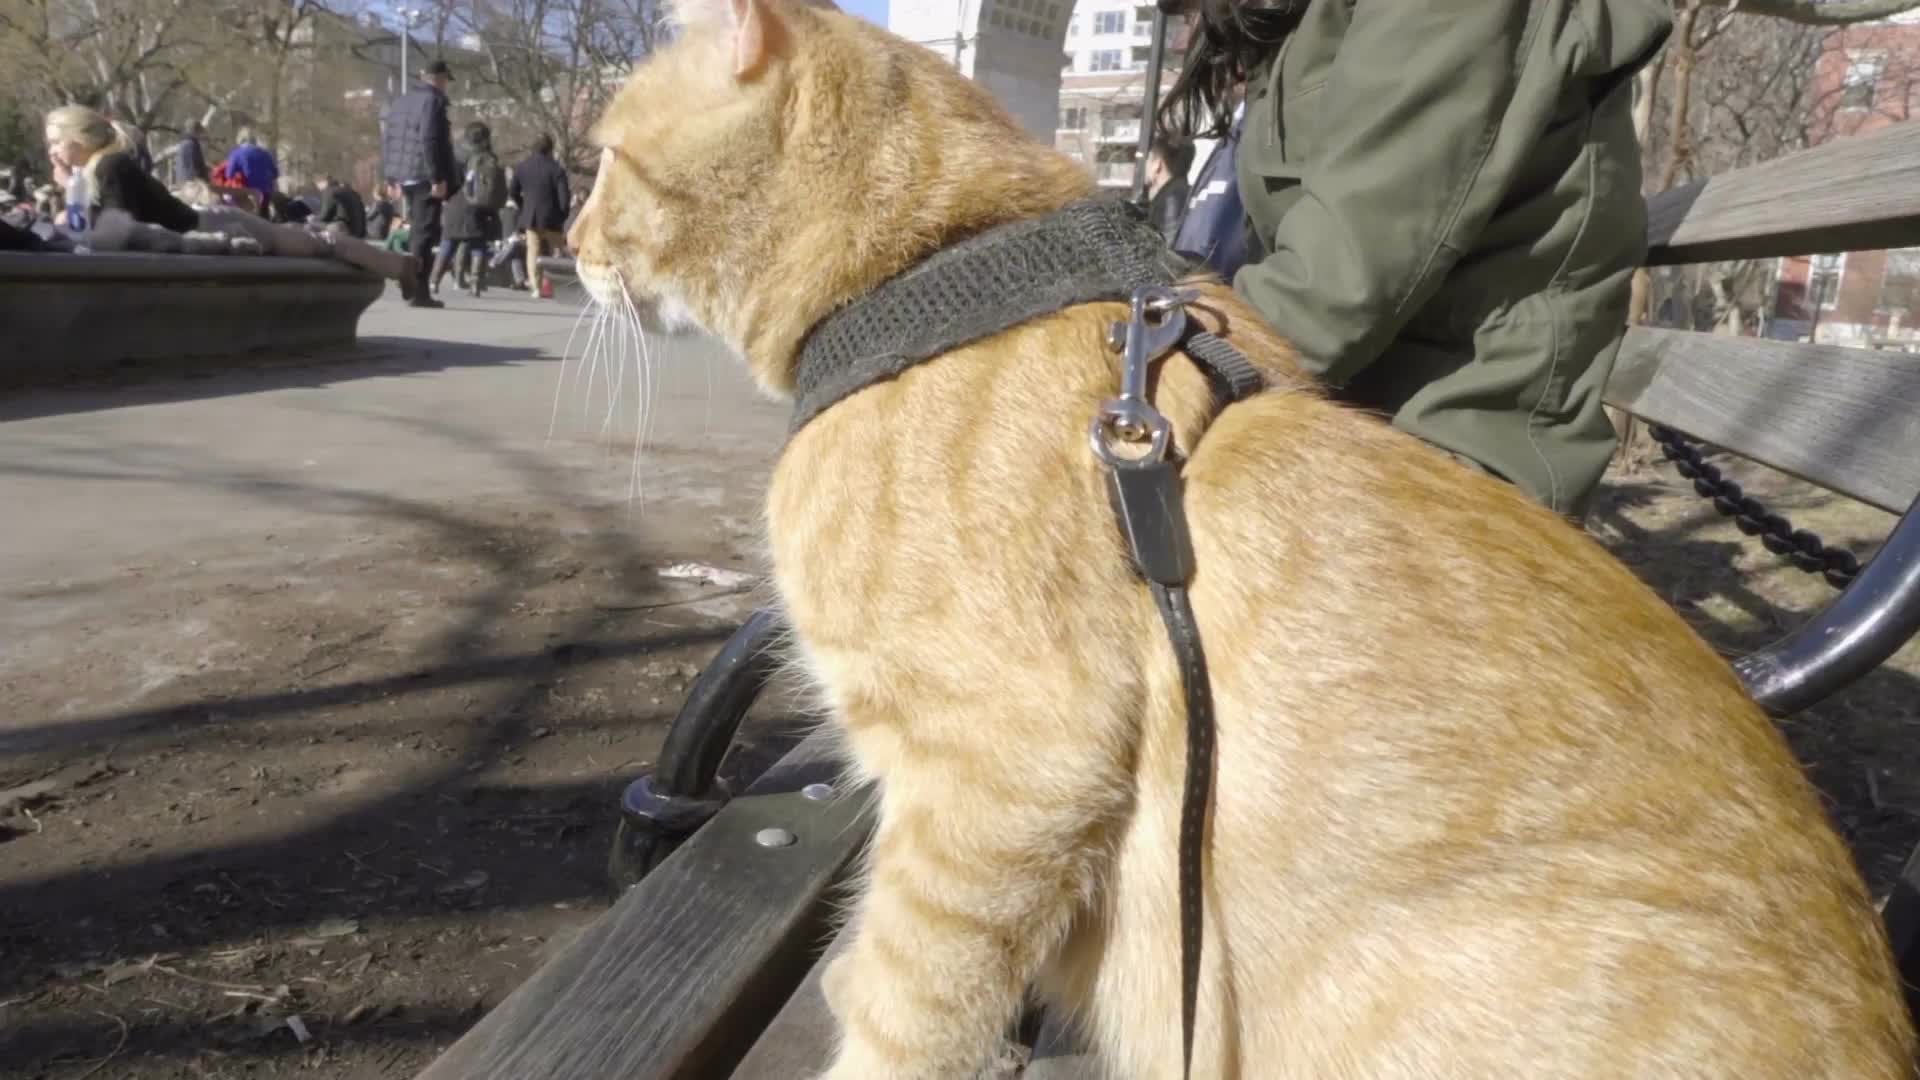 cat on harness and leash on Washington Square Park bench with arch in background in NYC